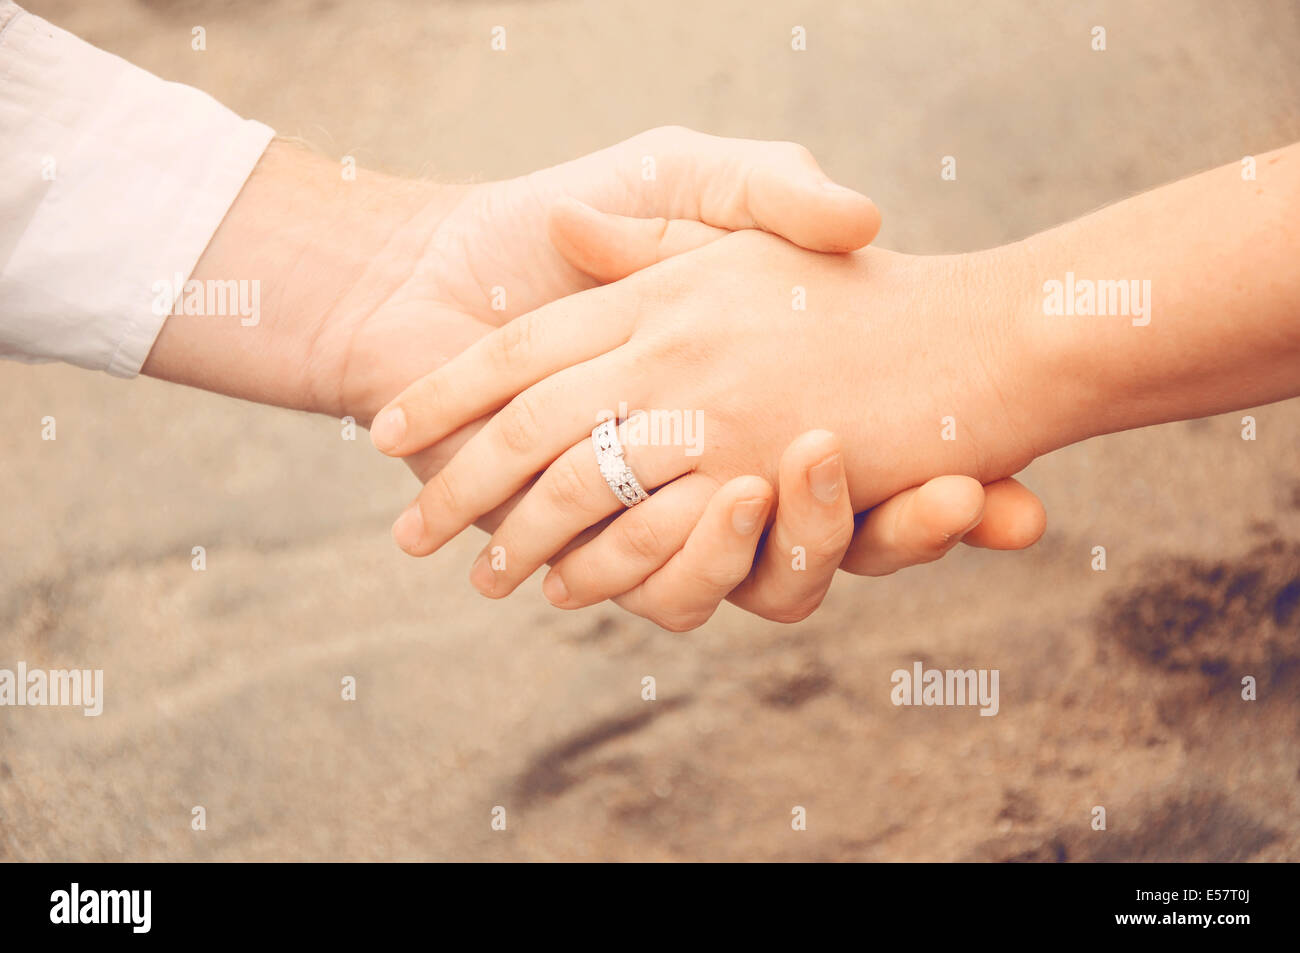 Holding hands on the beach, a newly engaged couple showing off her engagement ring Stock Photo